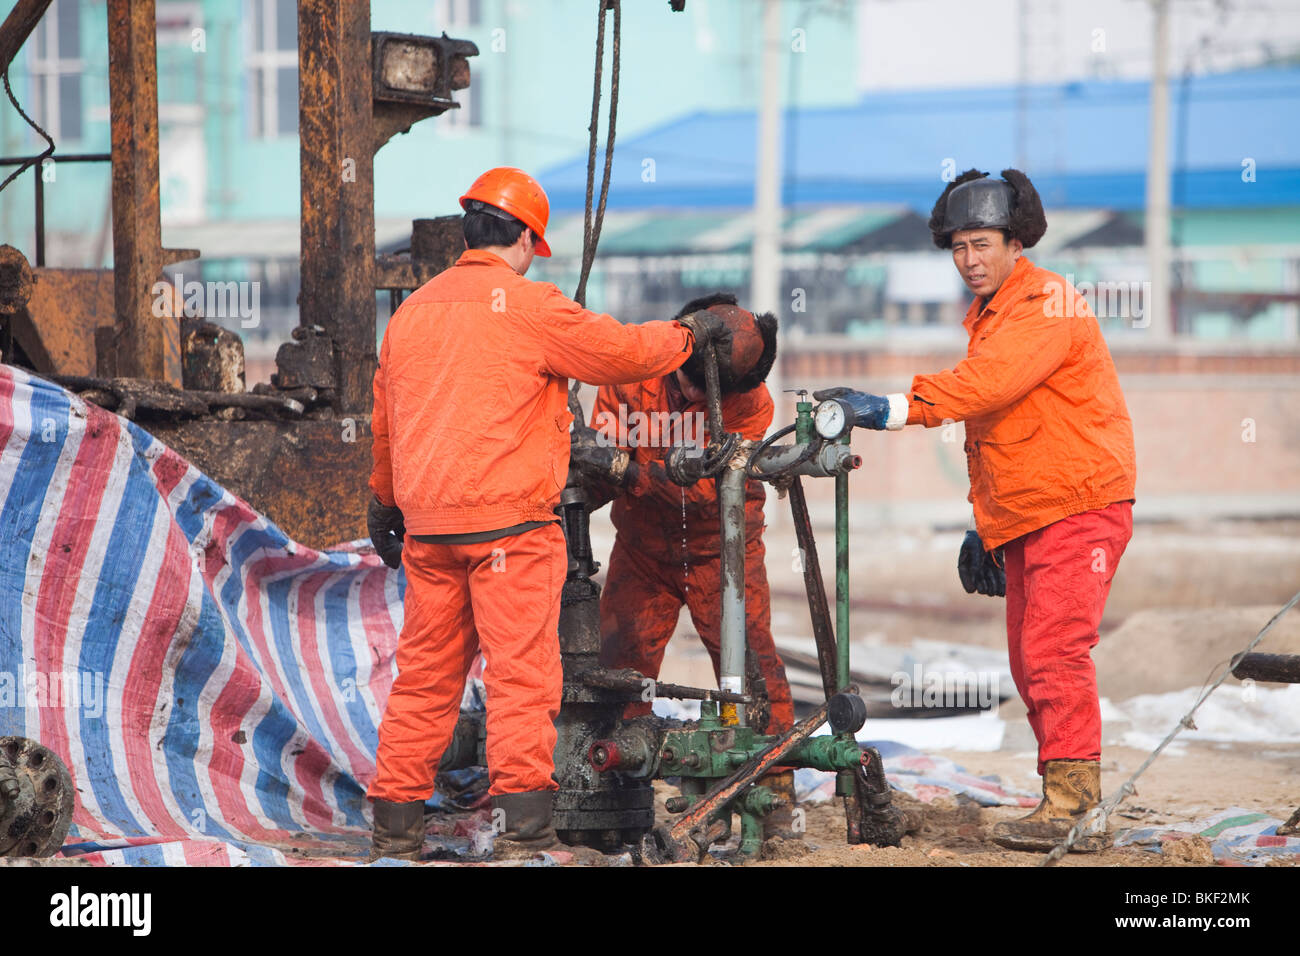 Oil workers drilling a new oil well in the Daqing oil field in Northern China Stock Photo